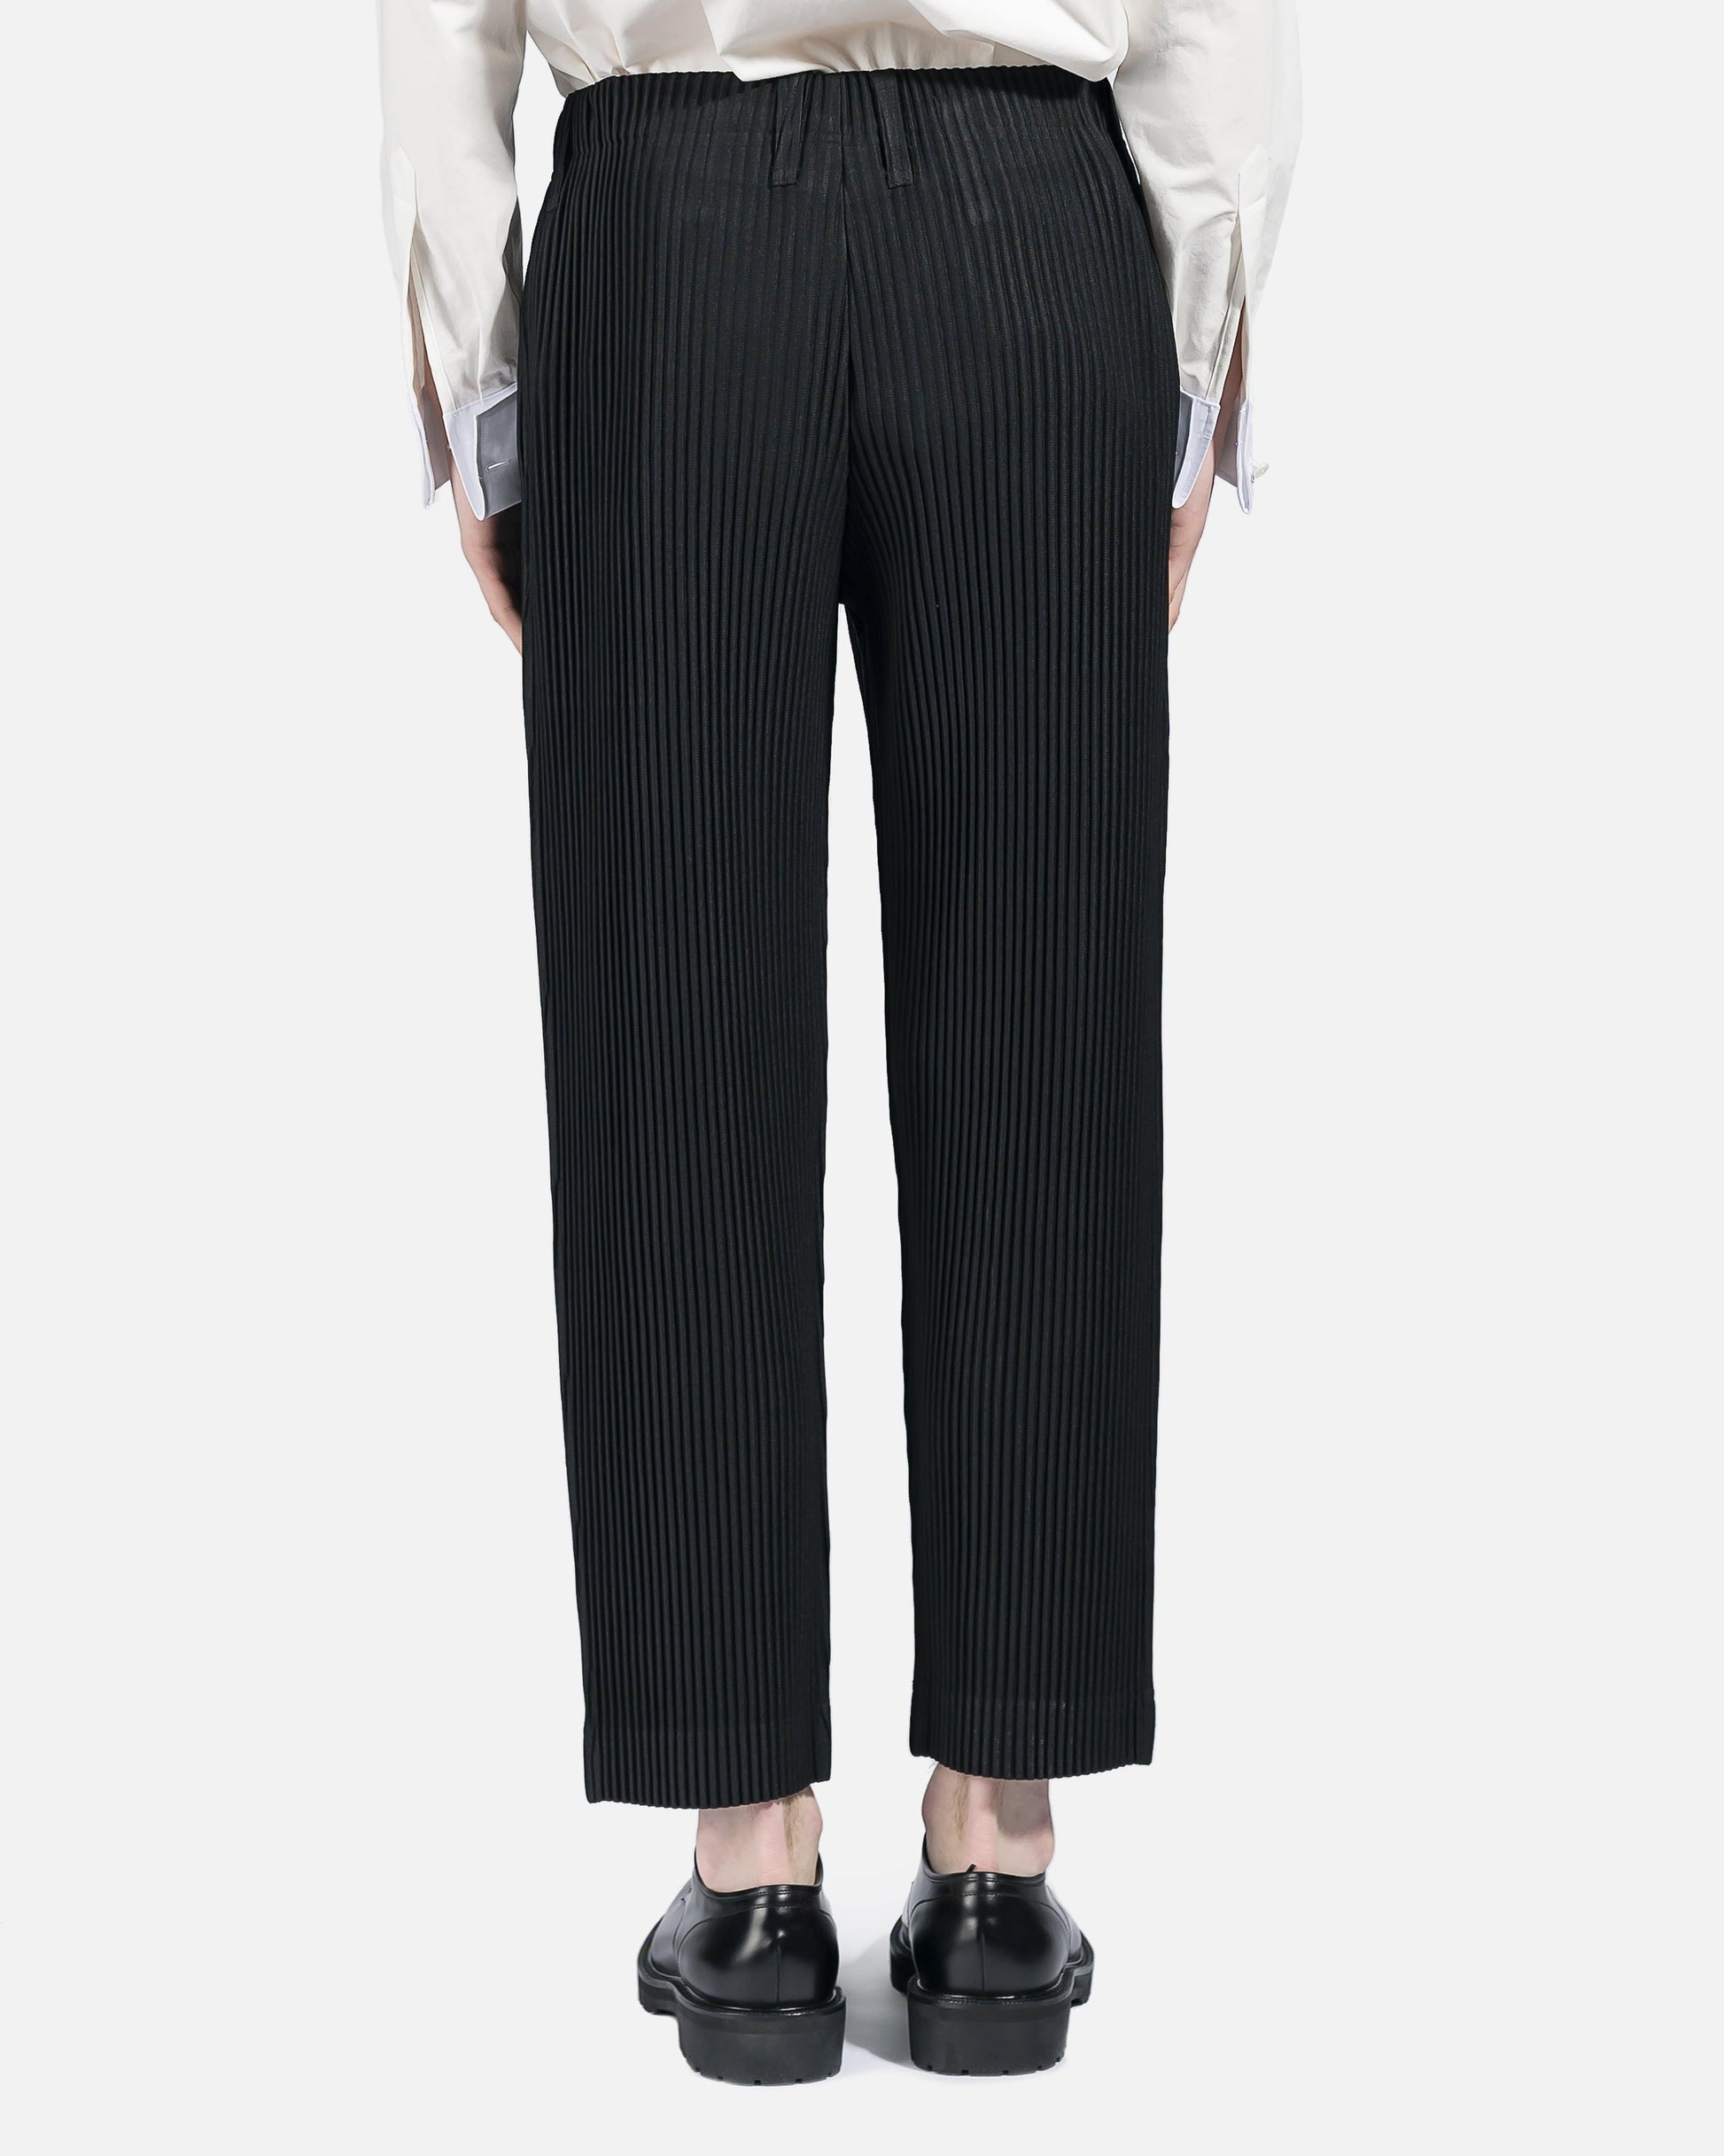 Homme Plissé Issey Miyake Men's Pants Basics Pleated Trousers in Black